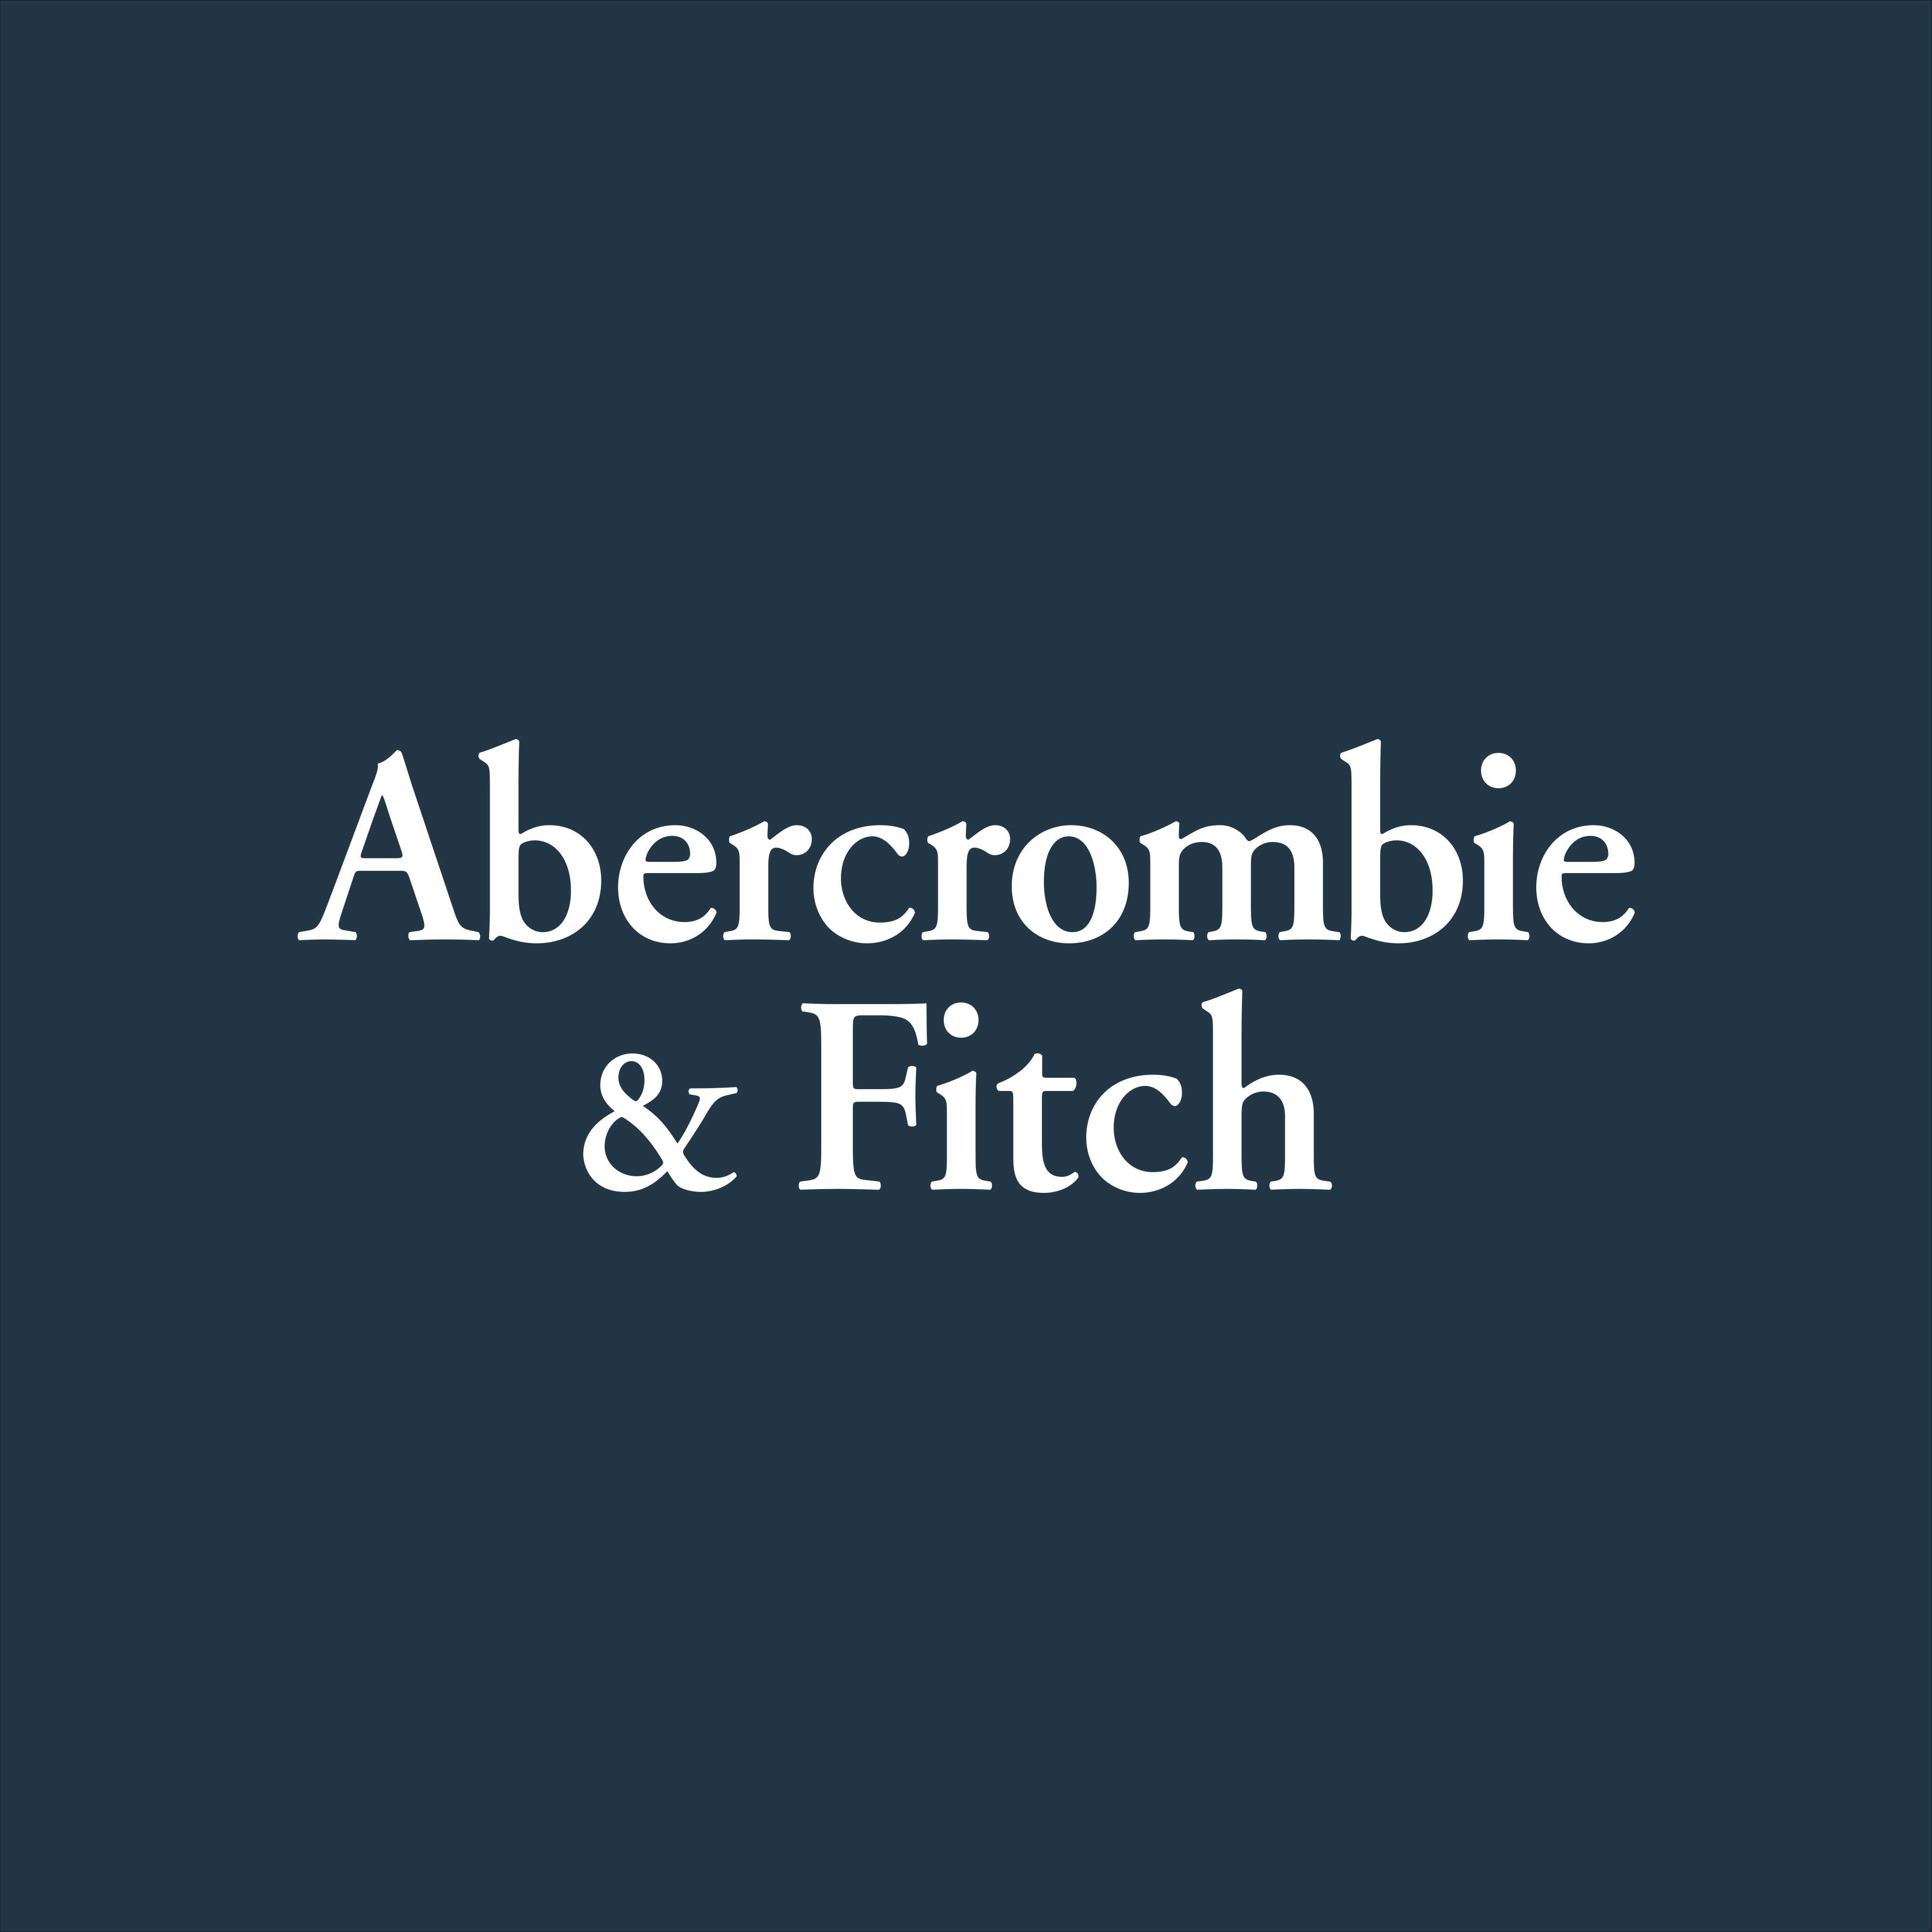 Abercrombie & Fitch | Authentic American clothing since 1892